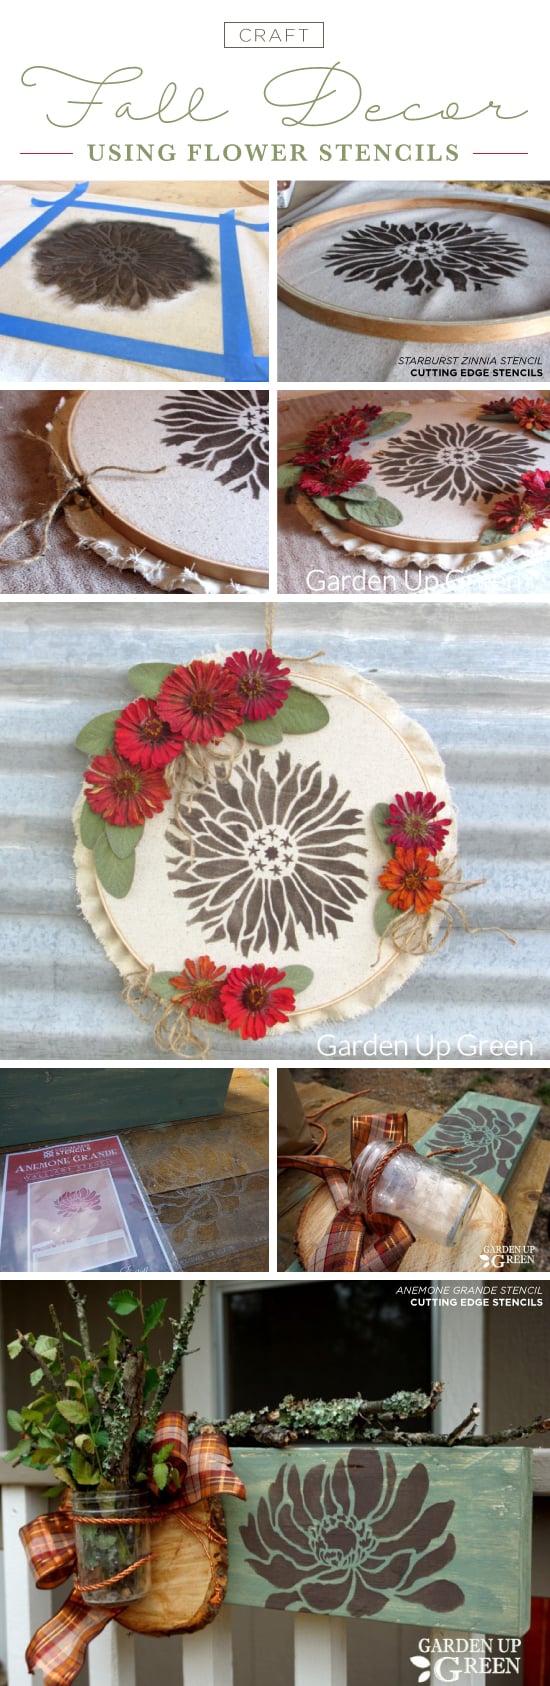 Cutting Edge Stencils shares how to create Fall inspired home decor using flower stencils. http://www.cuttingedgestencils.com/stencils-flower-stencil.html